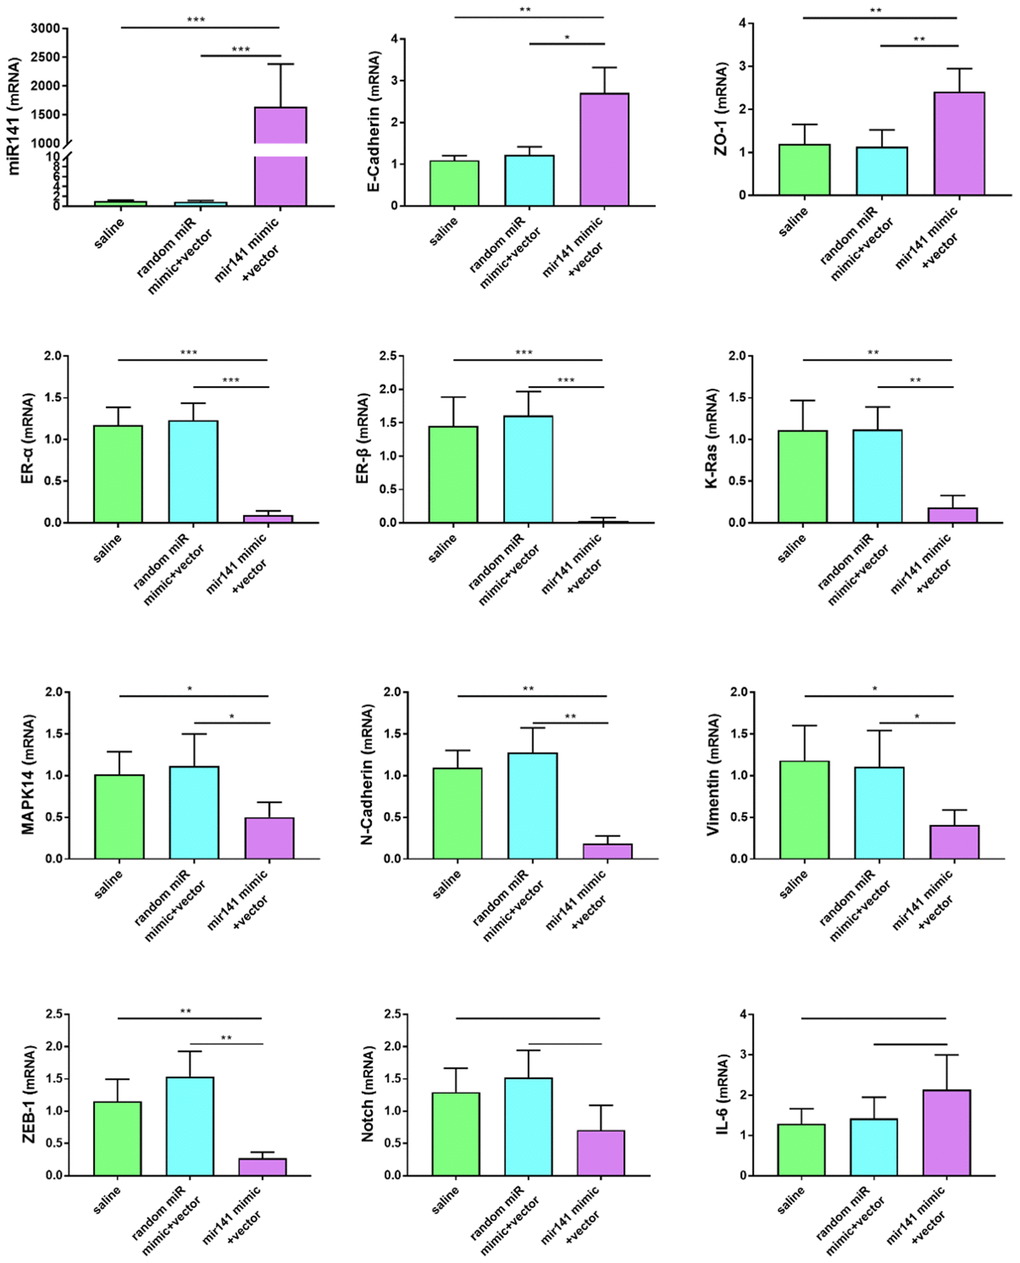 Effects of miR-141-5p treatment on mRNA expression of pathologically related genes in endometriosis detected by RT-qPCR. miR-141-5p treatment significantly decreased n-cadherin, Vimentin, K-ras, MAPK-14, ER-α, ER-β, ZEB-1 expression levels, and increased E-cadherin, ZO-1 expression levels. The data were shown as average percentage ±SEM. Replicated 3 times with 3 separate samples (*P 